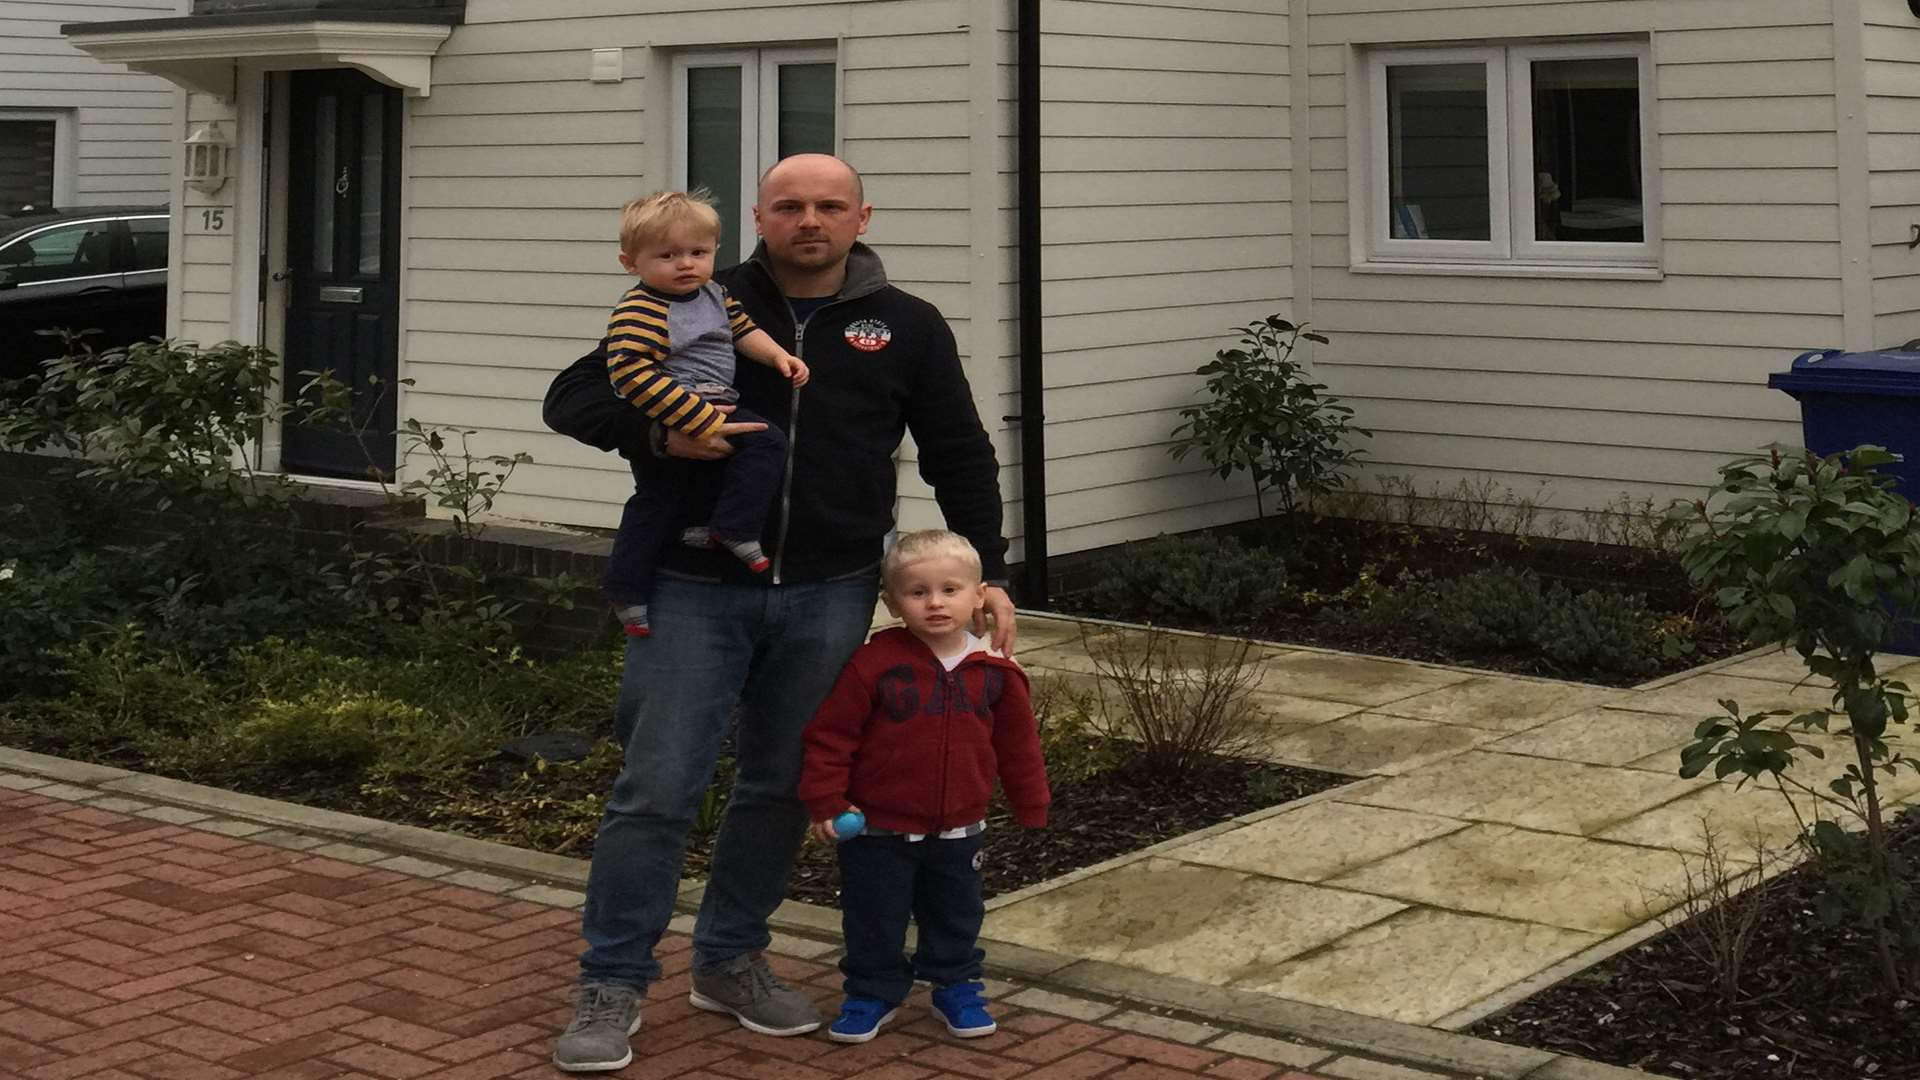 George Abbott with sons Leo, four, and Max, two. They live directly in the path of the new road proposals. If approved, they face a CPO and their house bulldozed.